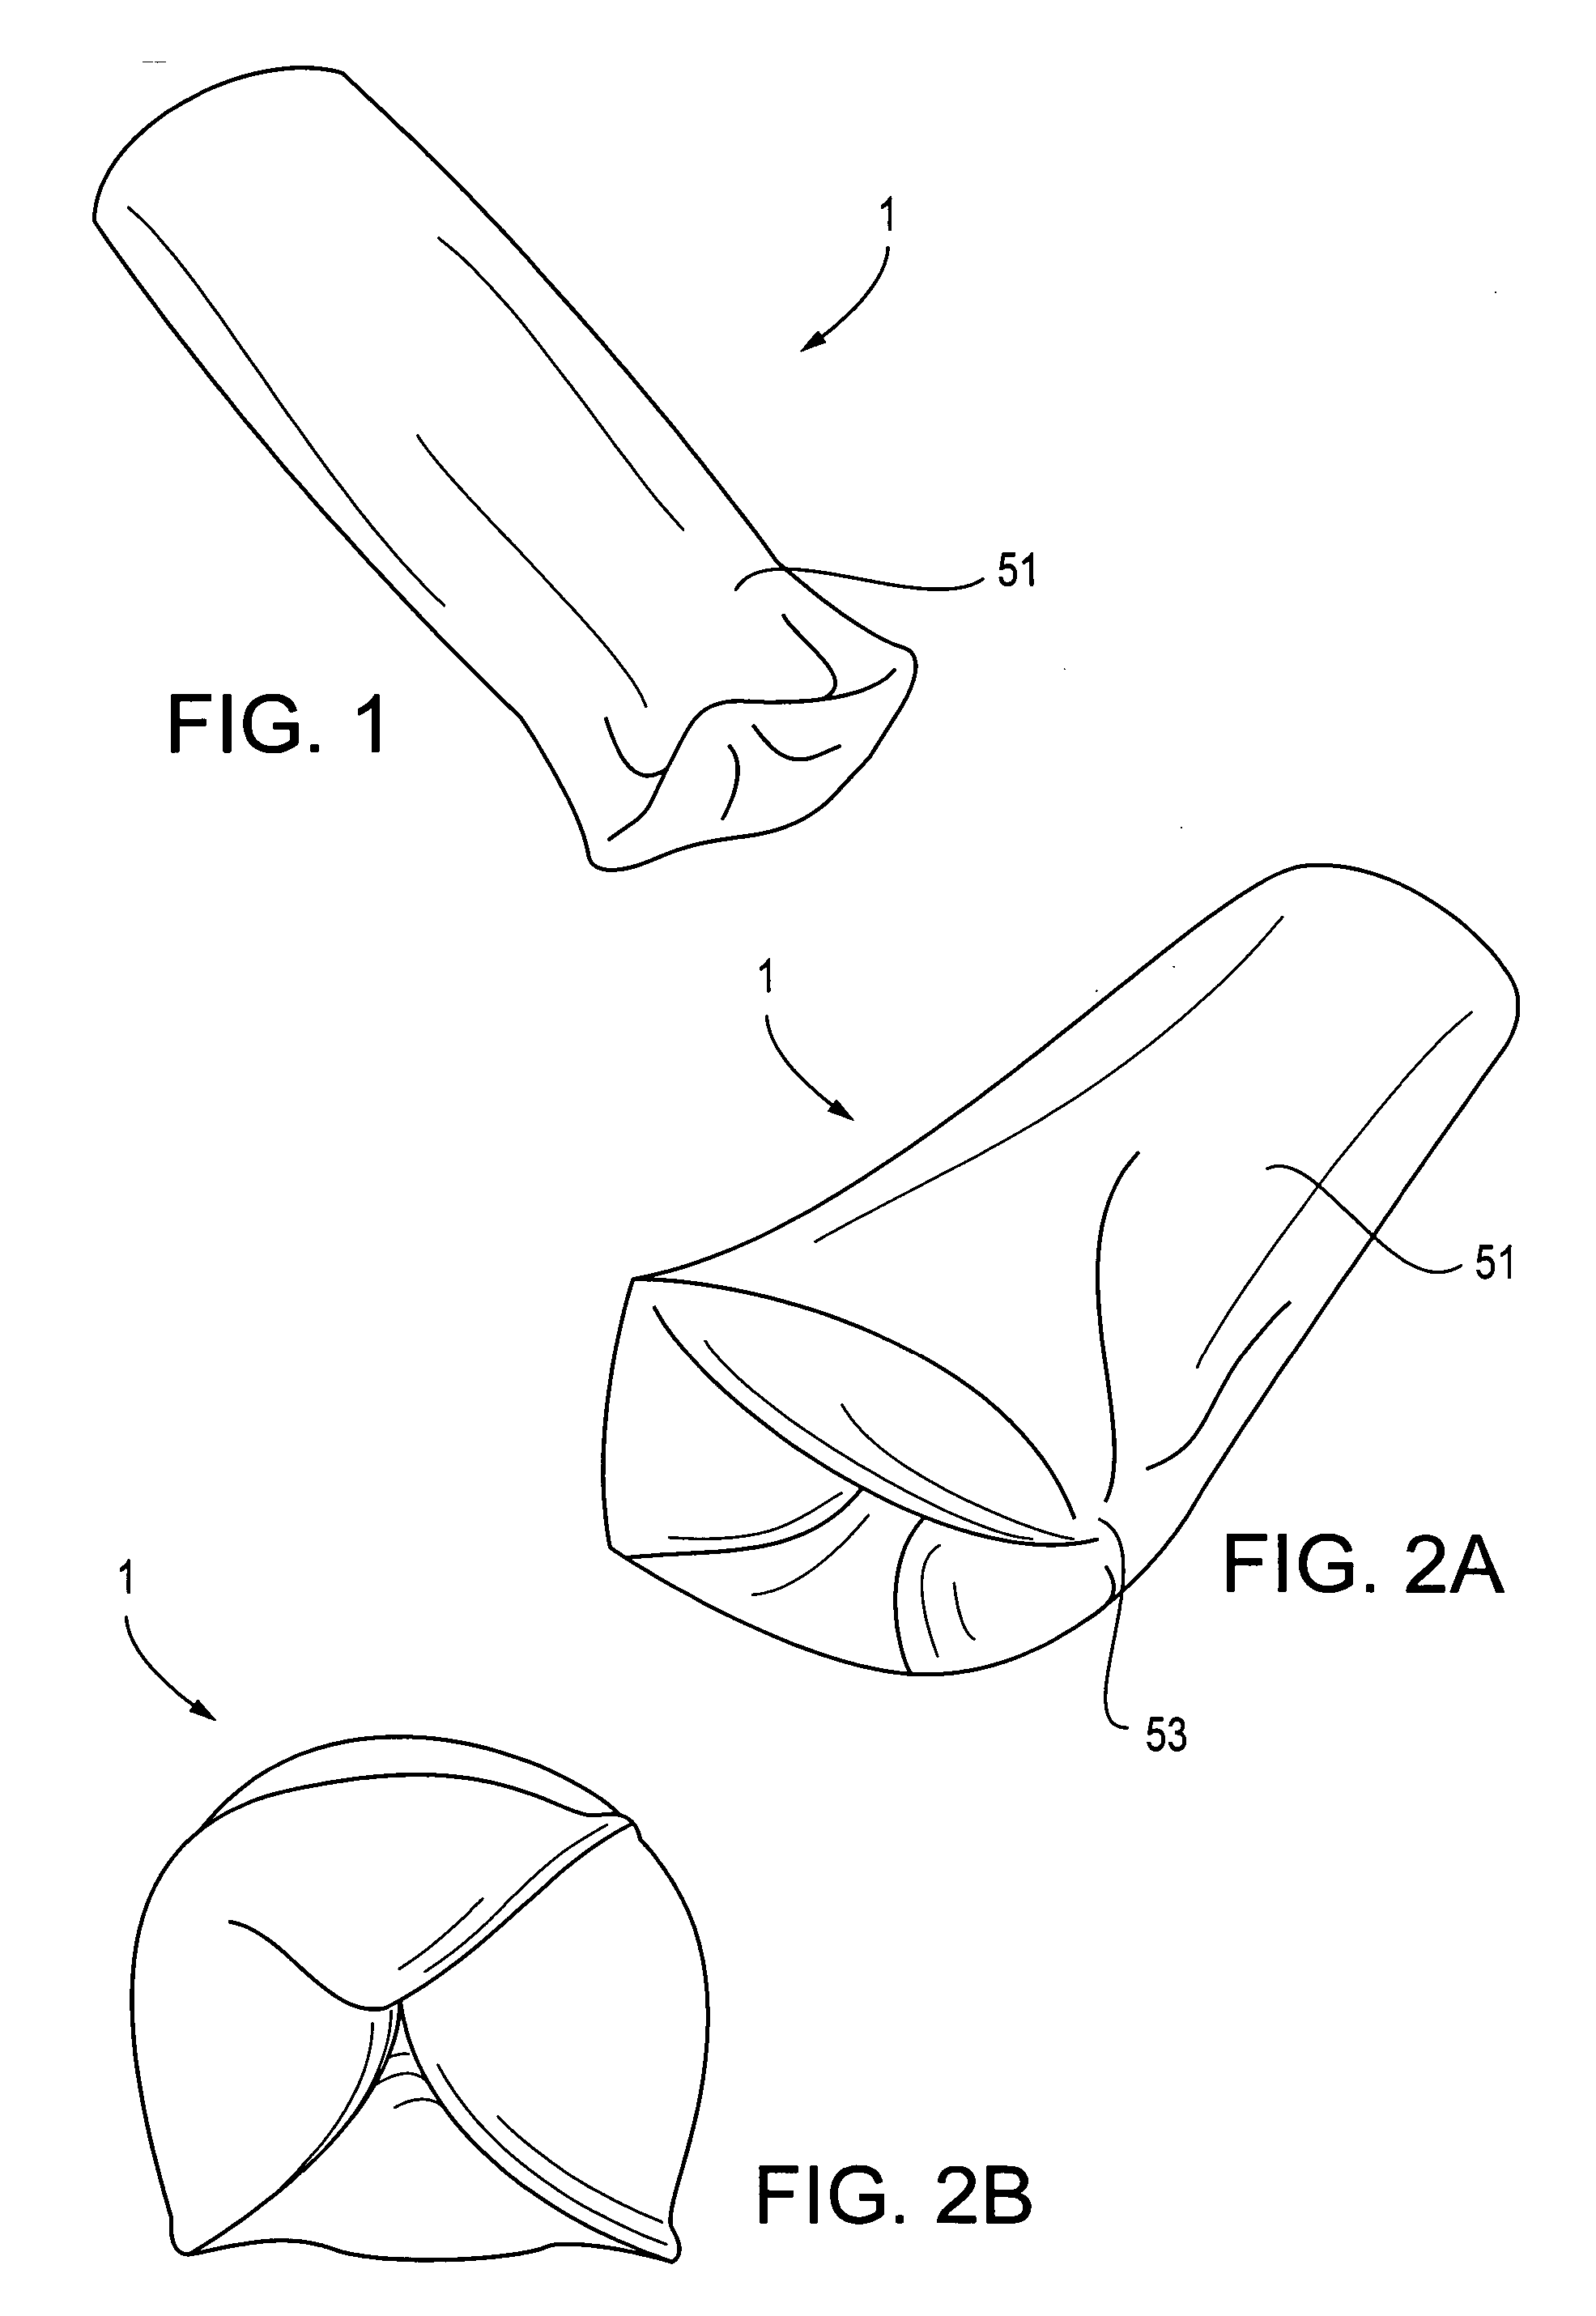 Method and system for minimizing leakage of a distending medium during endoscopic procedures